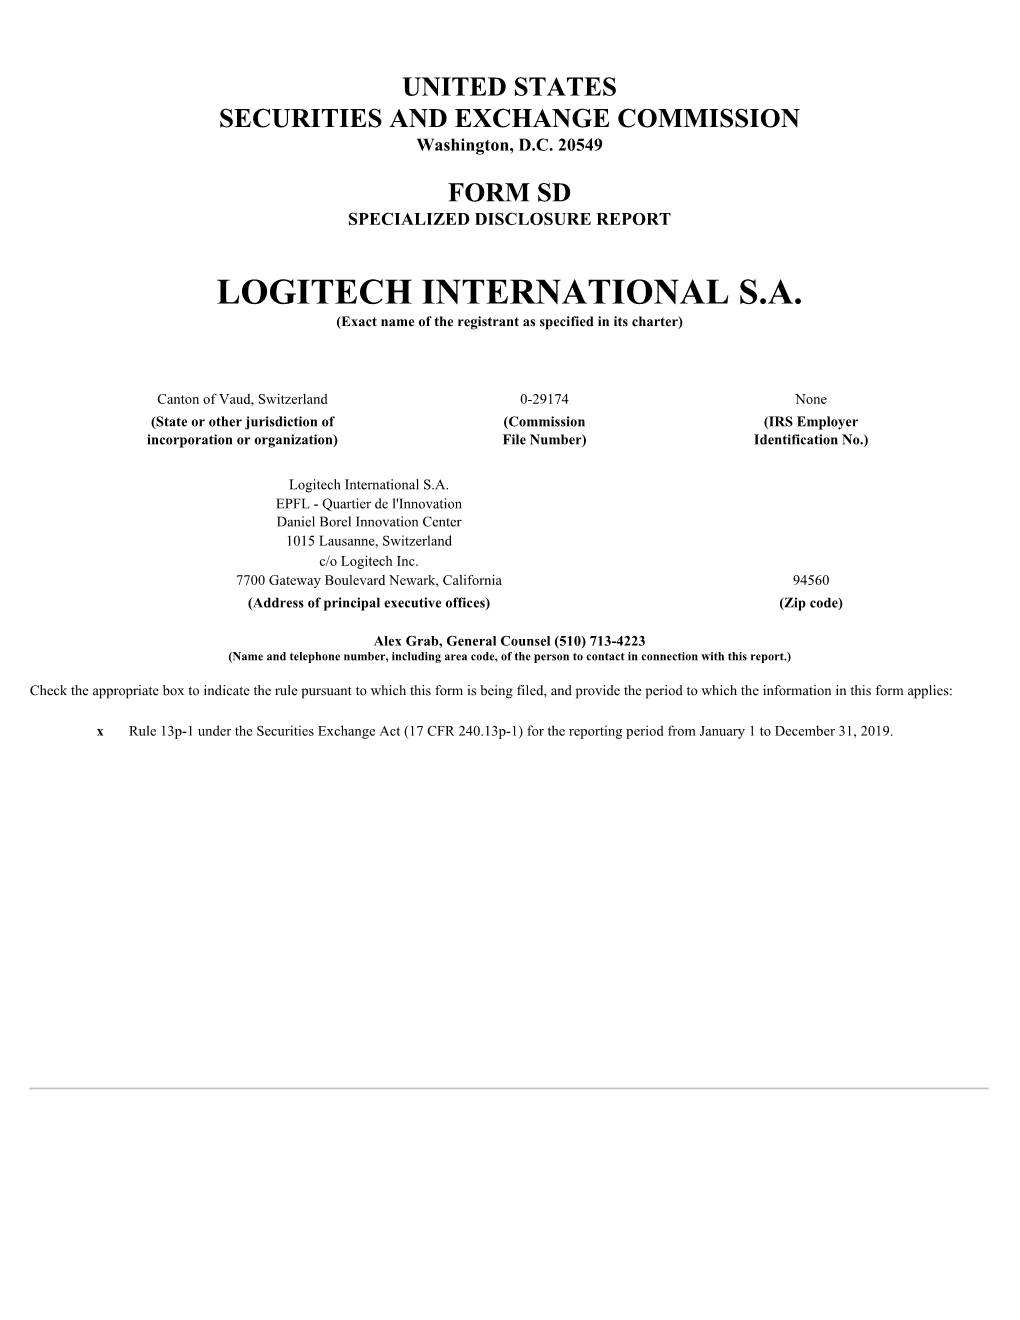 LOGITECH INTERNATIONAL S.A. (Exact Name of the Registrant As Specified in Its Charter)